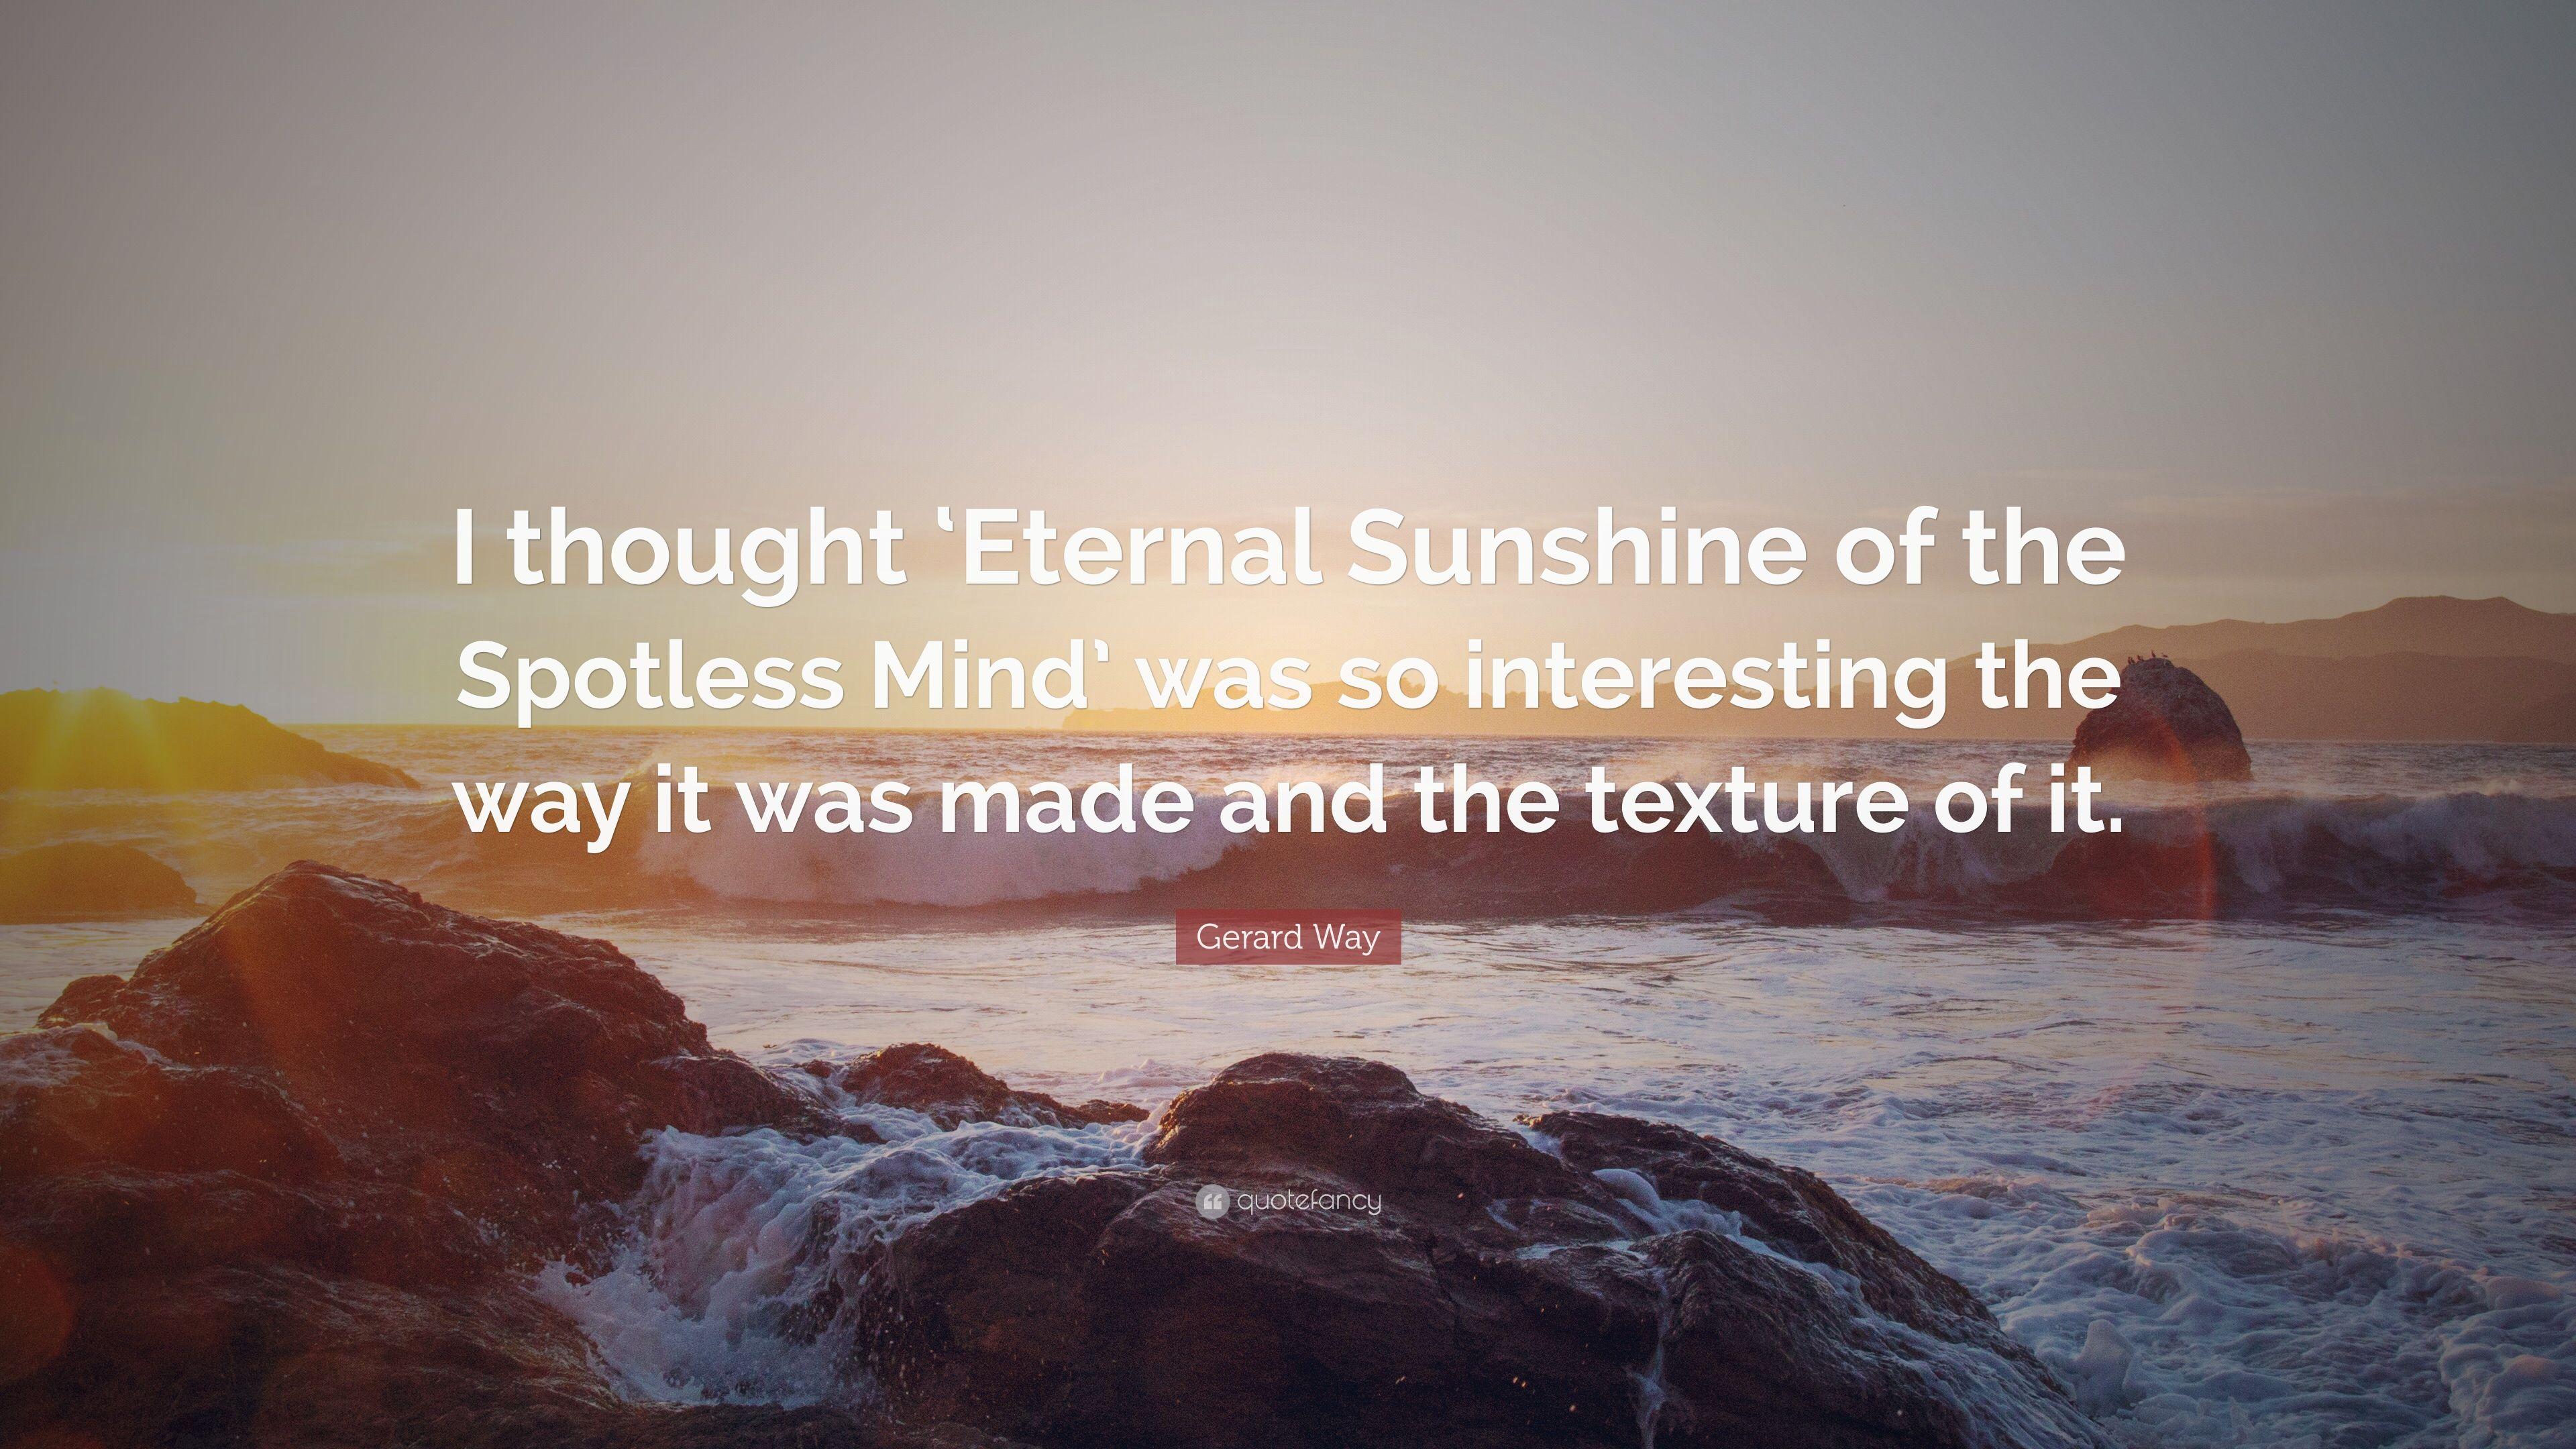 Gerard Way Quote: “I thought 'Eternal Sunshine of the Spotless